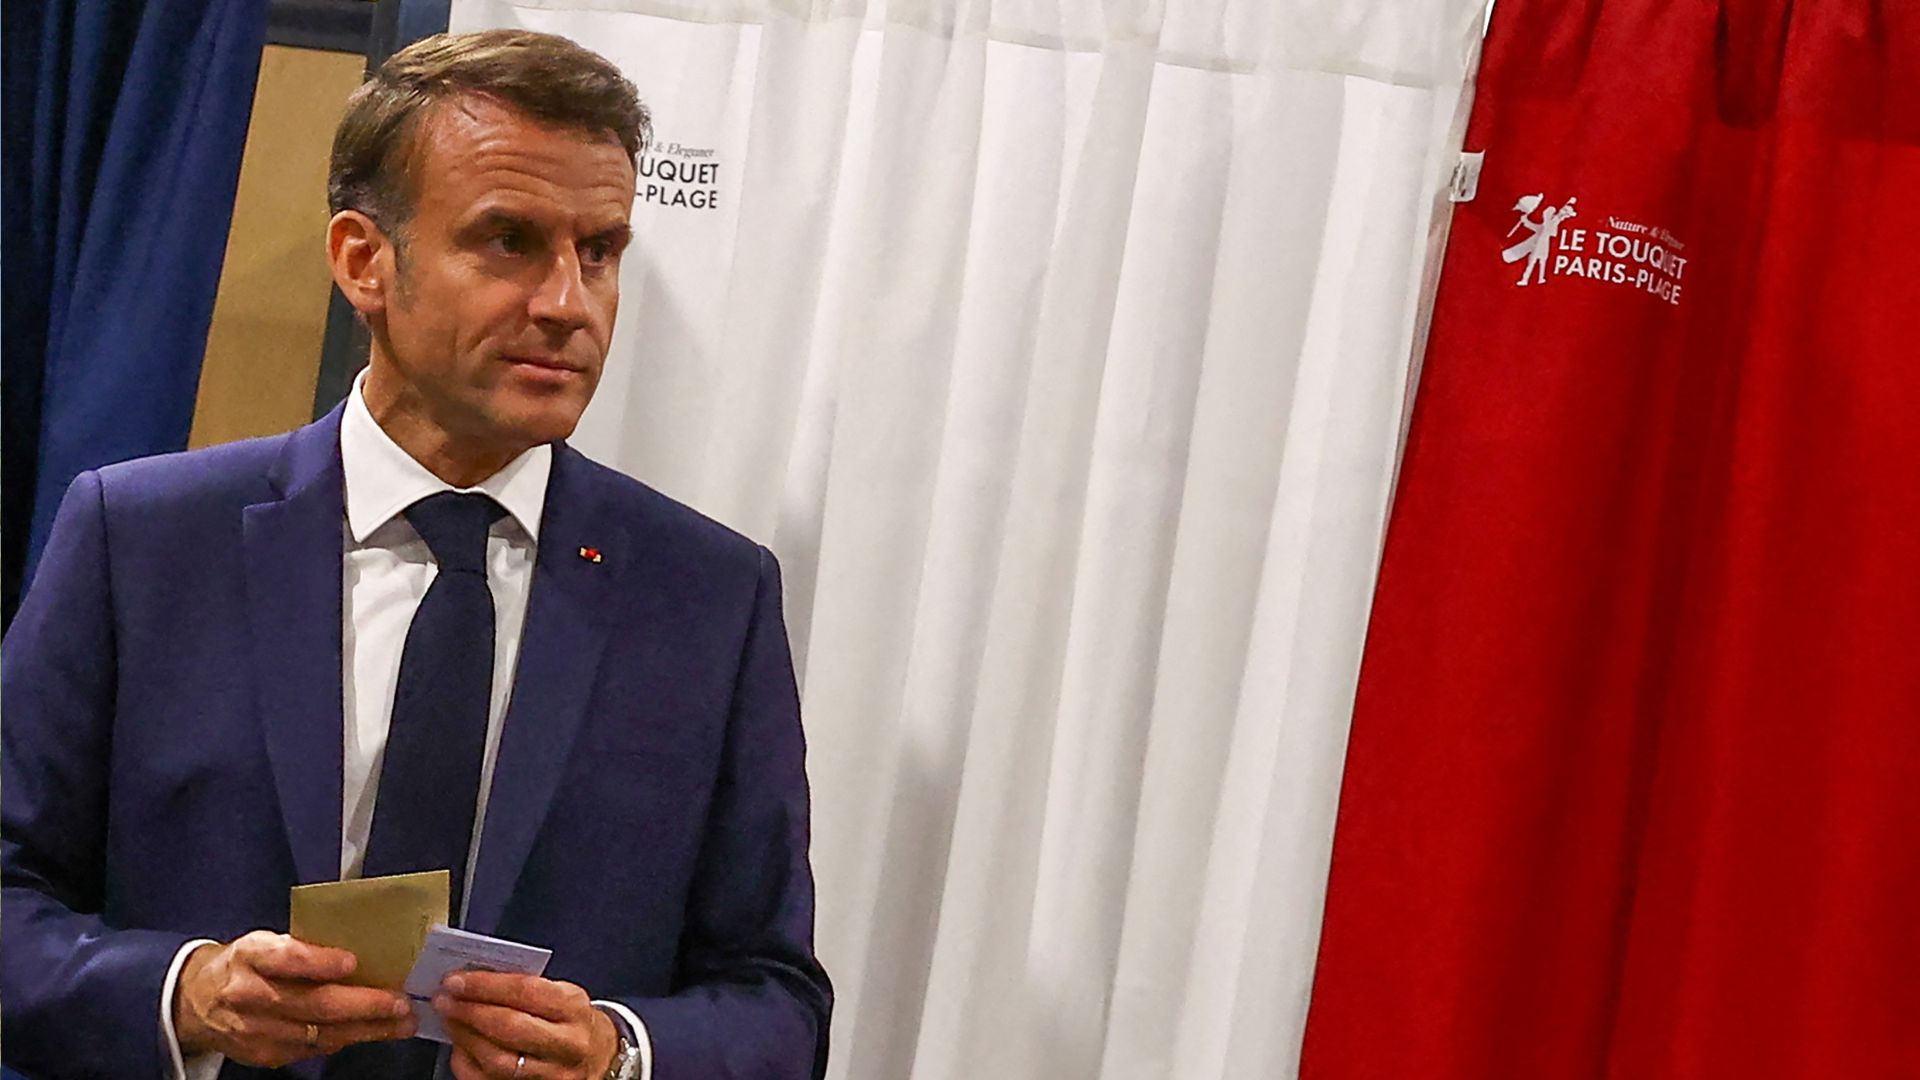 Macron exits a polling booth before casting his ballot for the European Parliament election at a polling station in Le Touquet.
/Hannah McKay/Pool/AFP